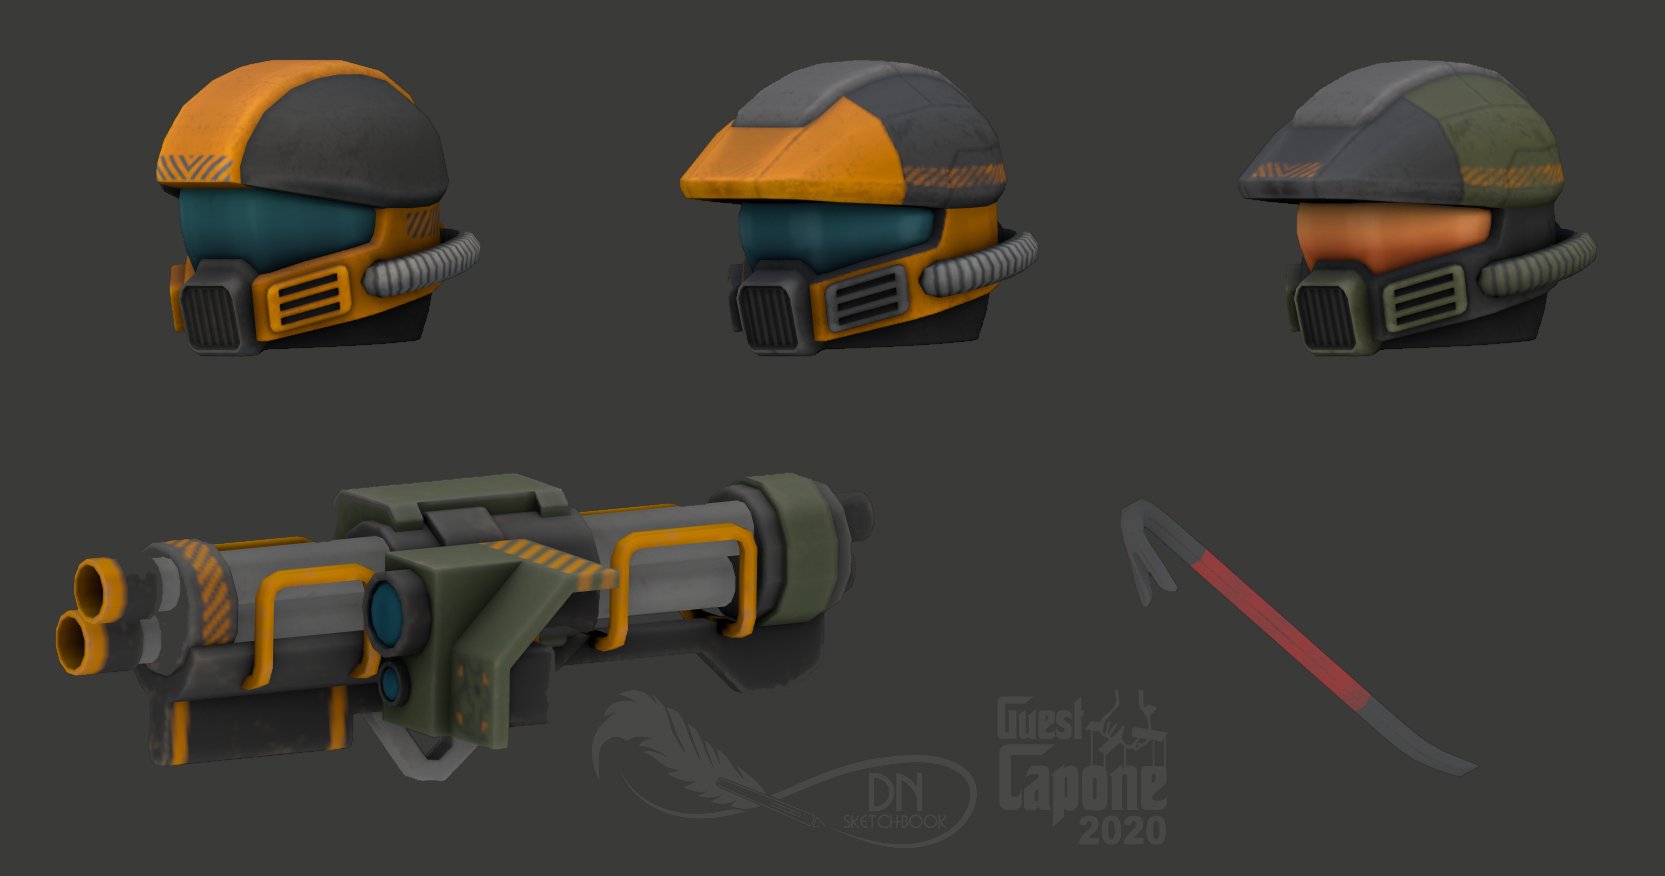 Guest Capone On Twitter Robloxdev Robloxugc Roblox Ugc Epic Items On The Catalog 4 This Week Crowbar Https T Co Zaow5mmitg Rad Suppress Helmet Https T Co 0xb5xtrzzm Hod Helmet Https T Co Gmy2q8ydzq Juggernaut Helmet Https T Co - roblox power armor helmet ugc